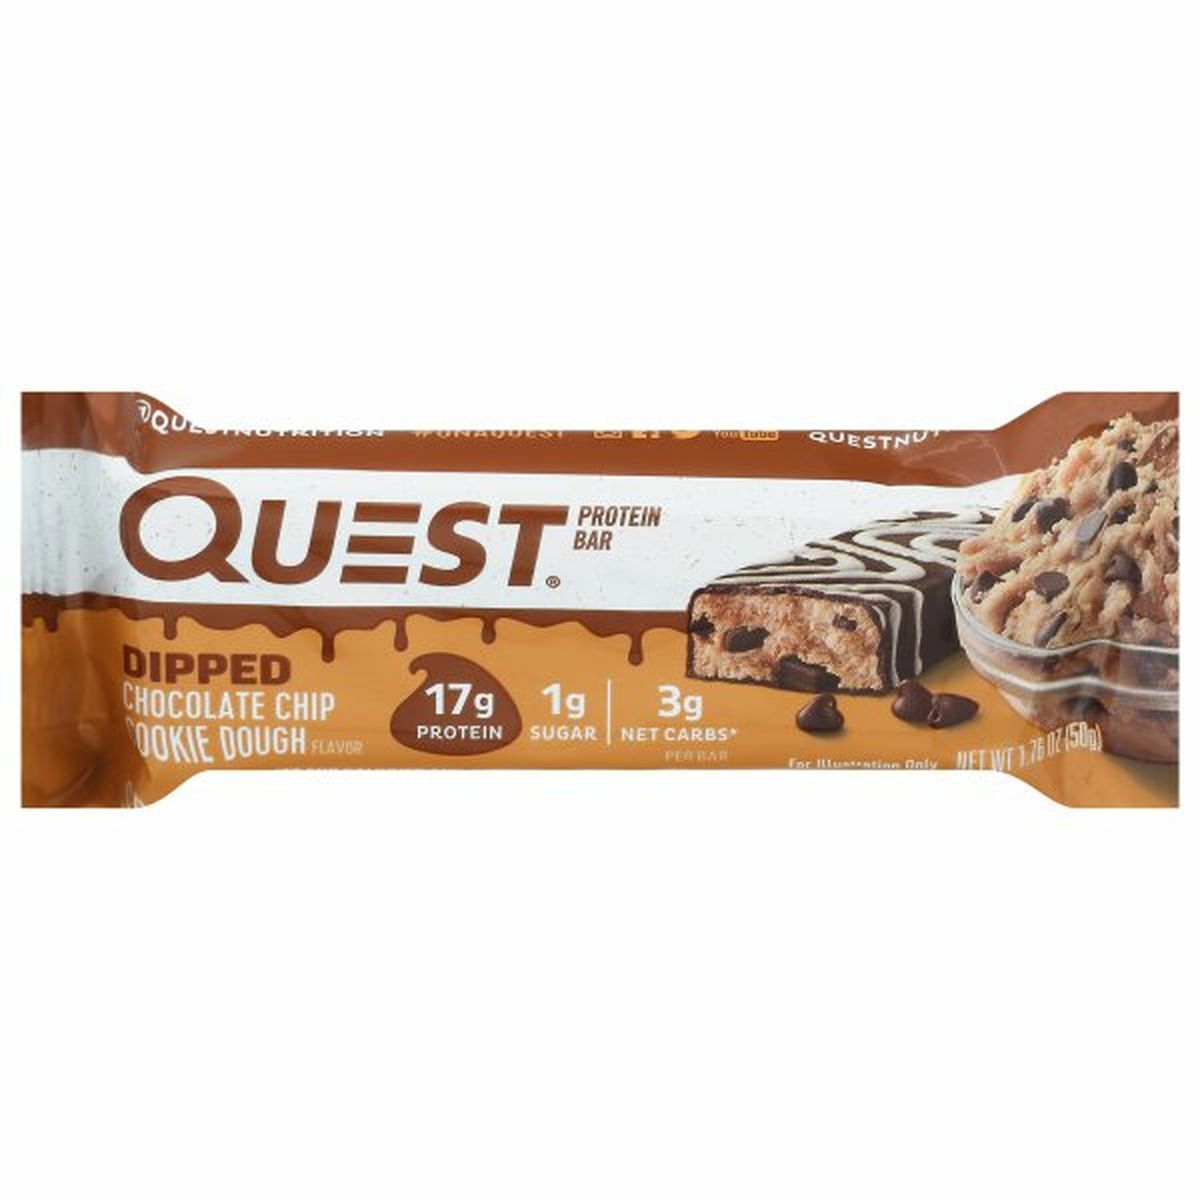 Calories in Quest Protein Bar, Chocolate Chip Cookie Dough Flavor, Dipped